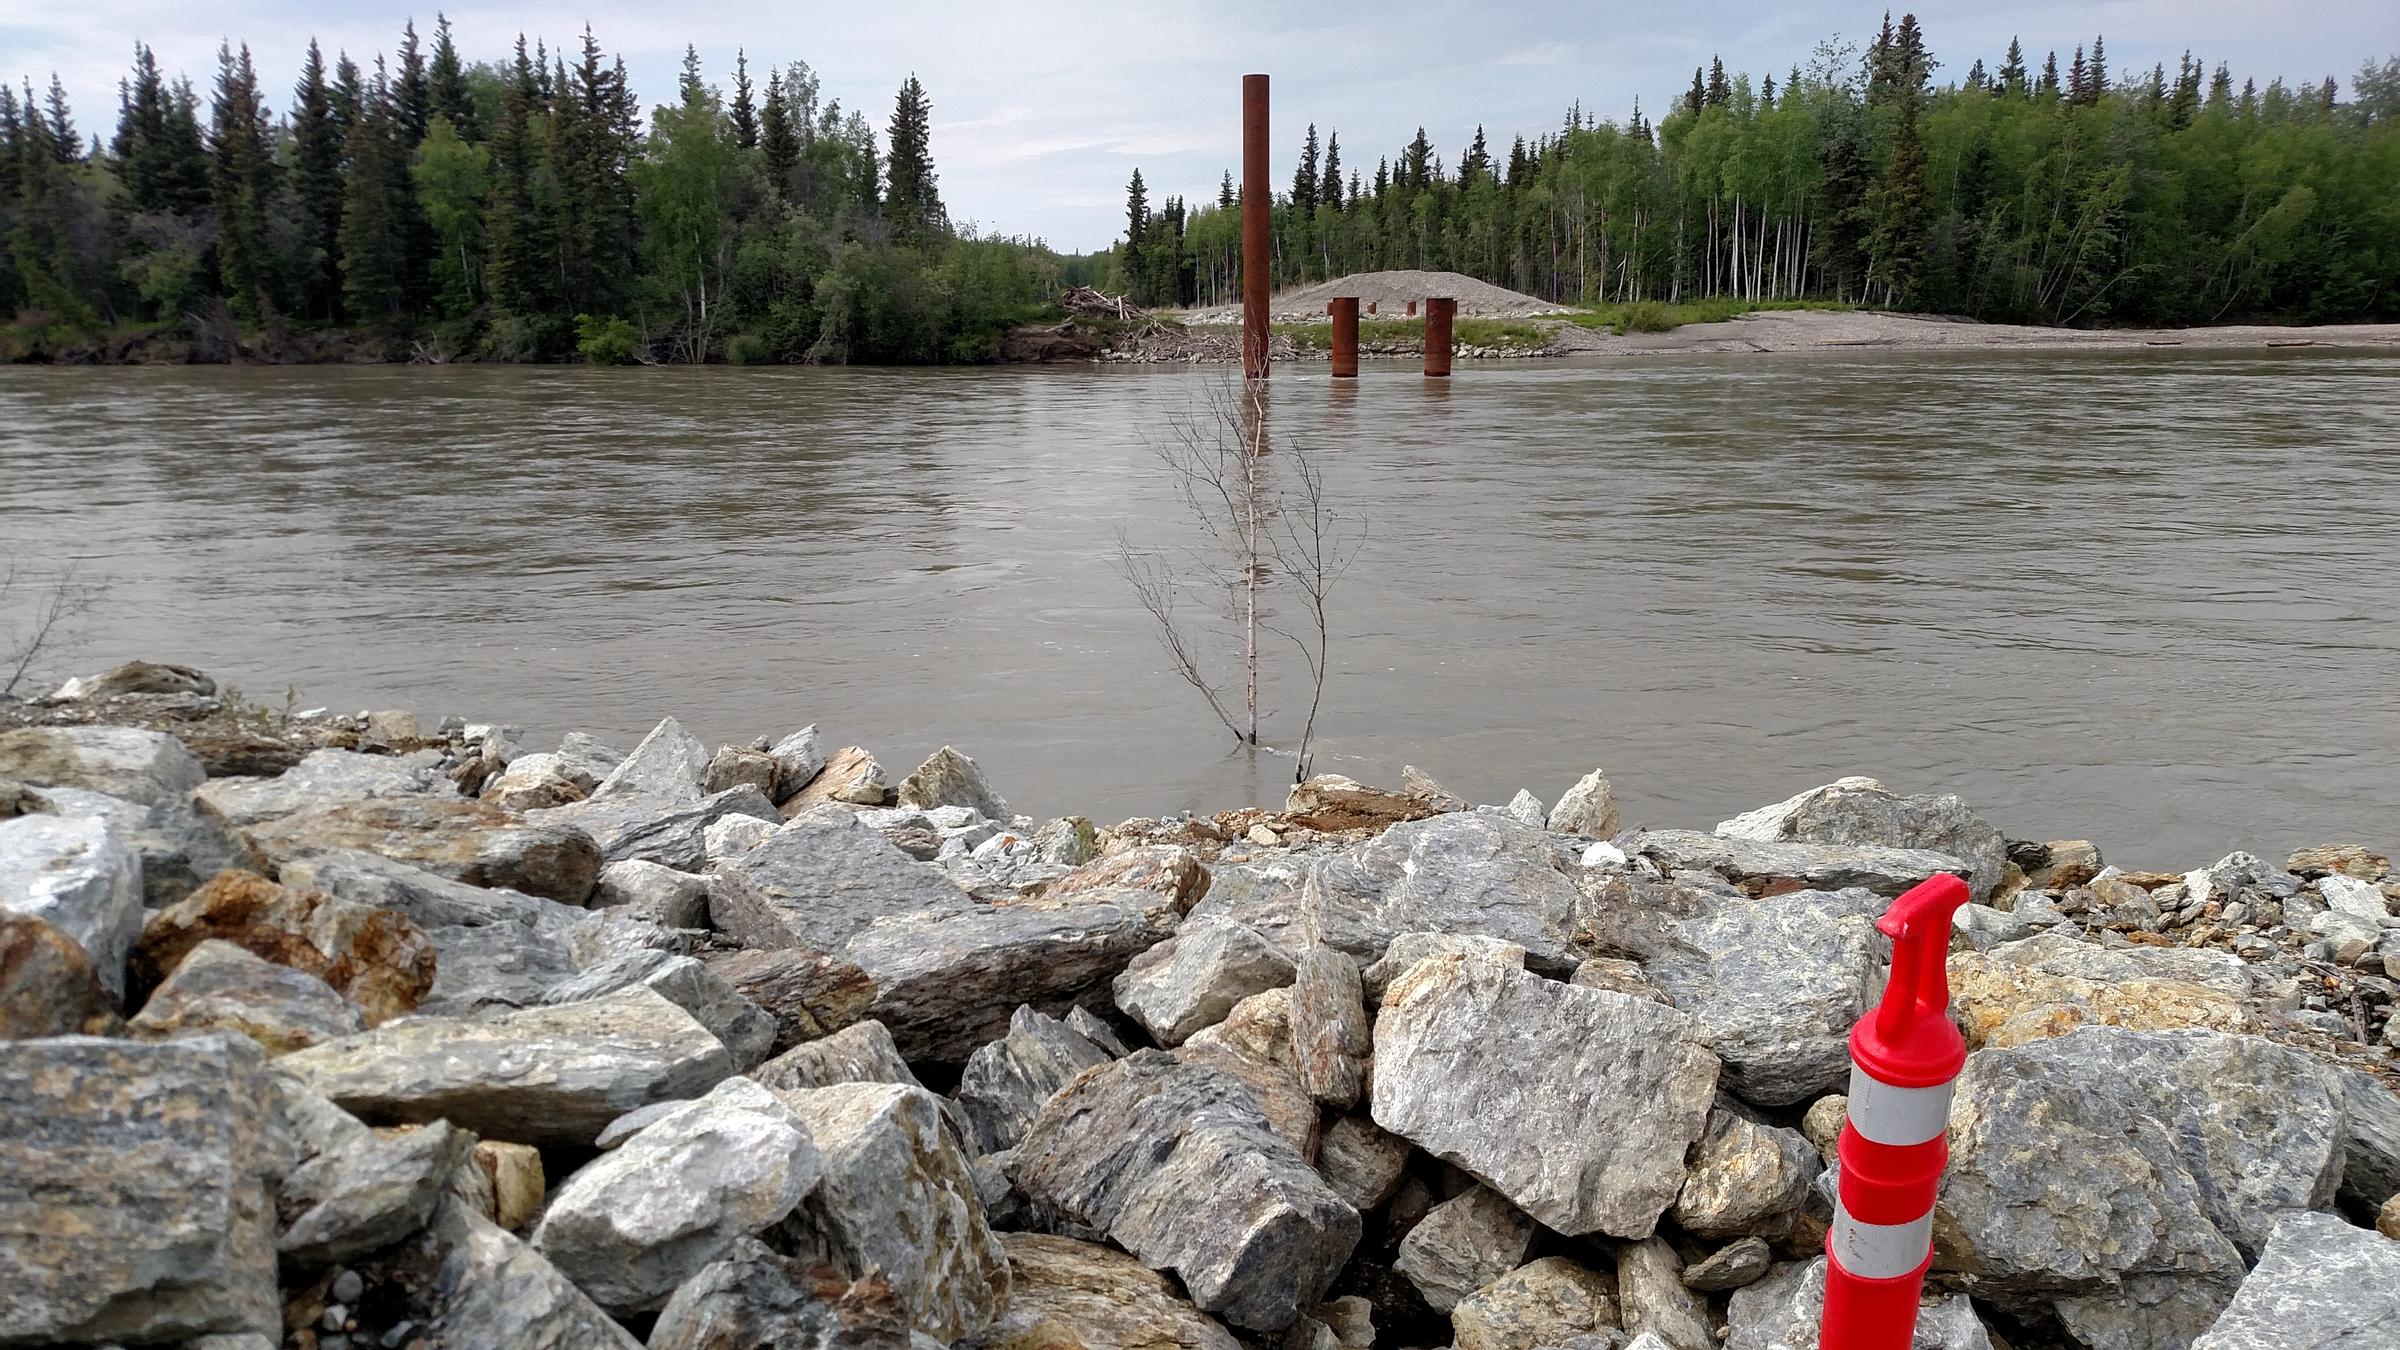 Nenana's contractor was able to accomplish some work on the big bridge, including driving pilings into the riverbed near the opposite side, before money for the project ran out. (Photo by Tim Ellis, KUAC - Fairbanks)